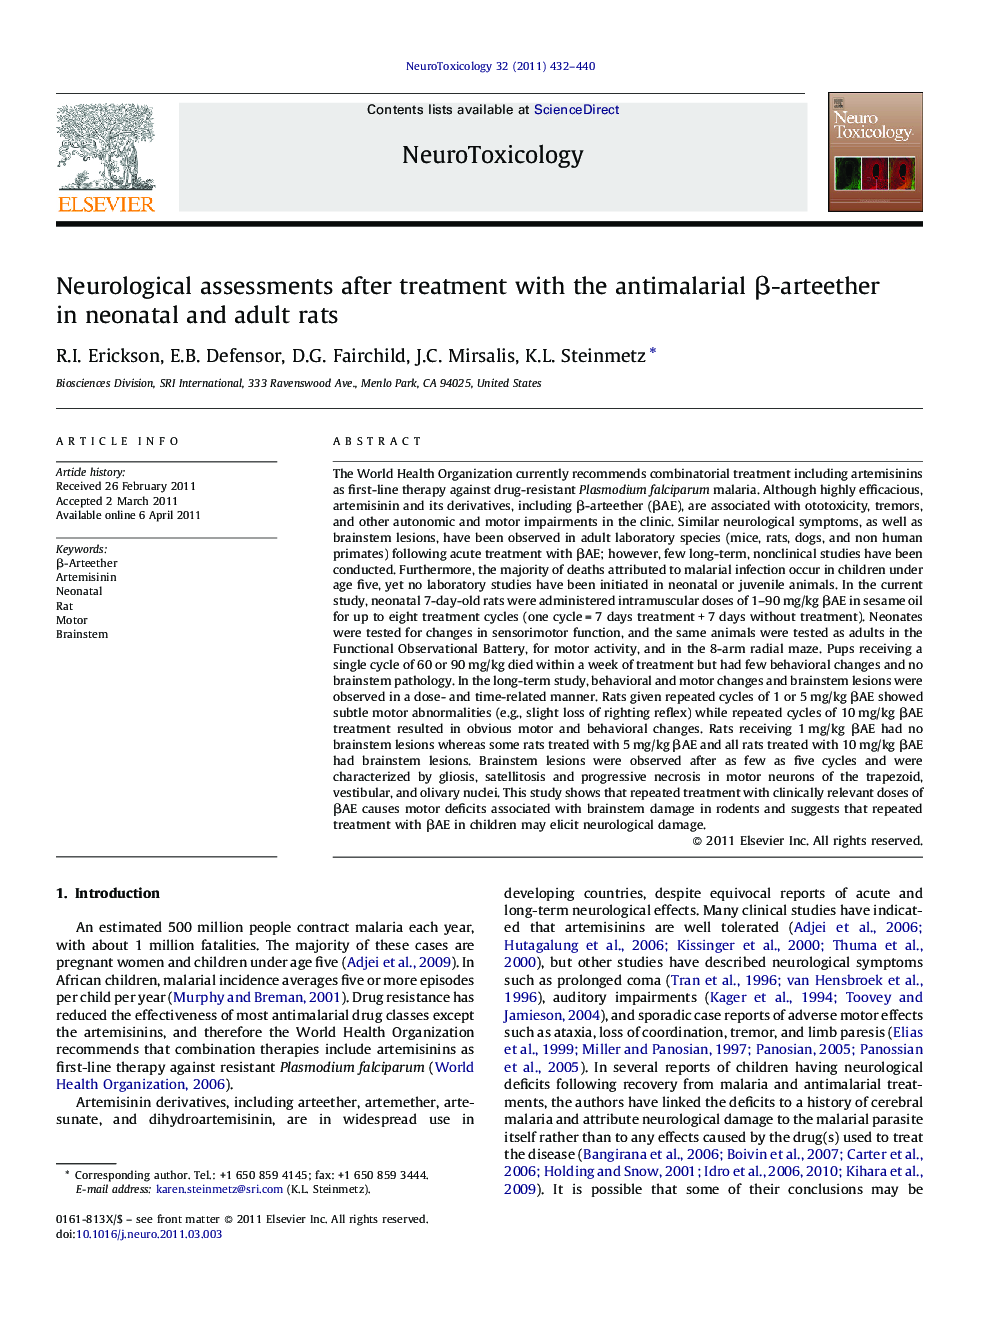 Neurological assessments after treatment with the antimalarial β-arteether in neonatal and adult rats